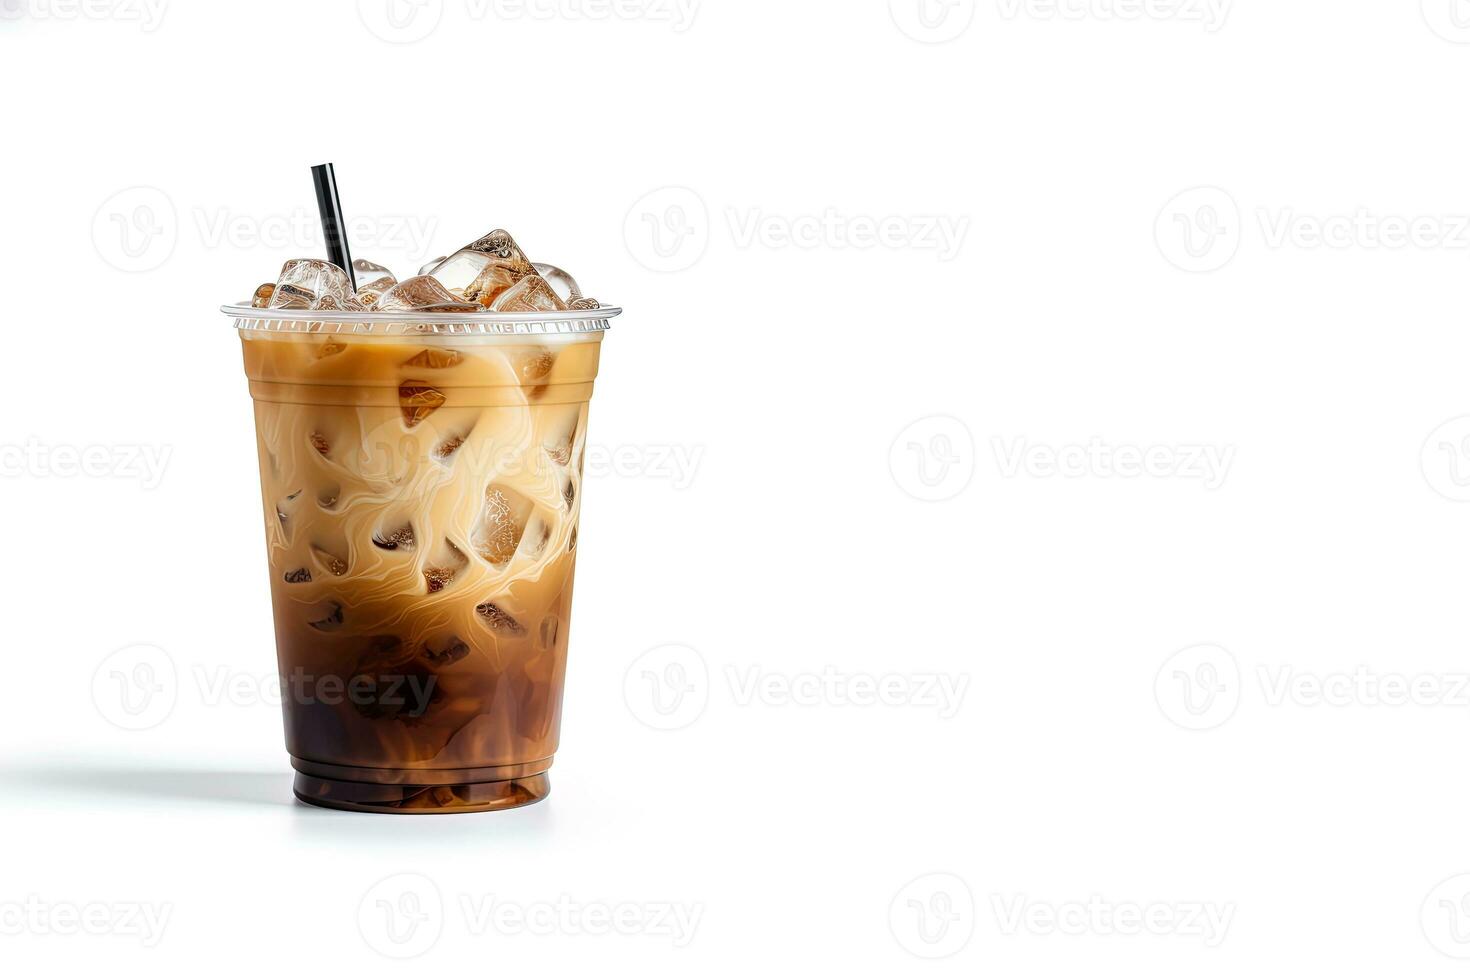 https://static.vecteezy.com/system/resources/previews/027/469/263/non_2x/iced-coffee-in-plastic-takeaway-glass-isolated-on-white-background-with-copy-space-ai-generated-photo.jpg